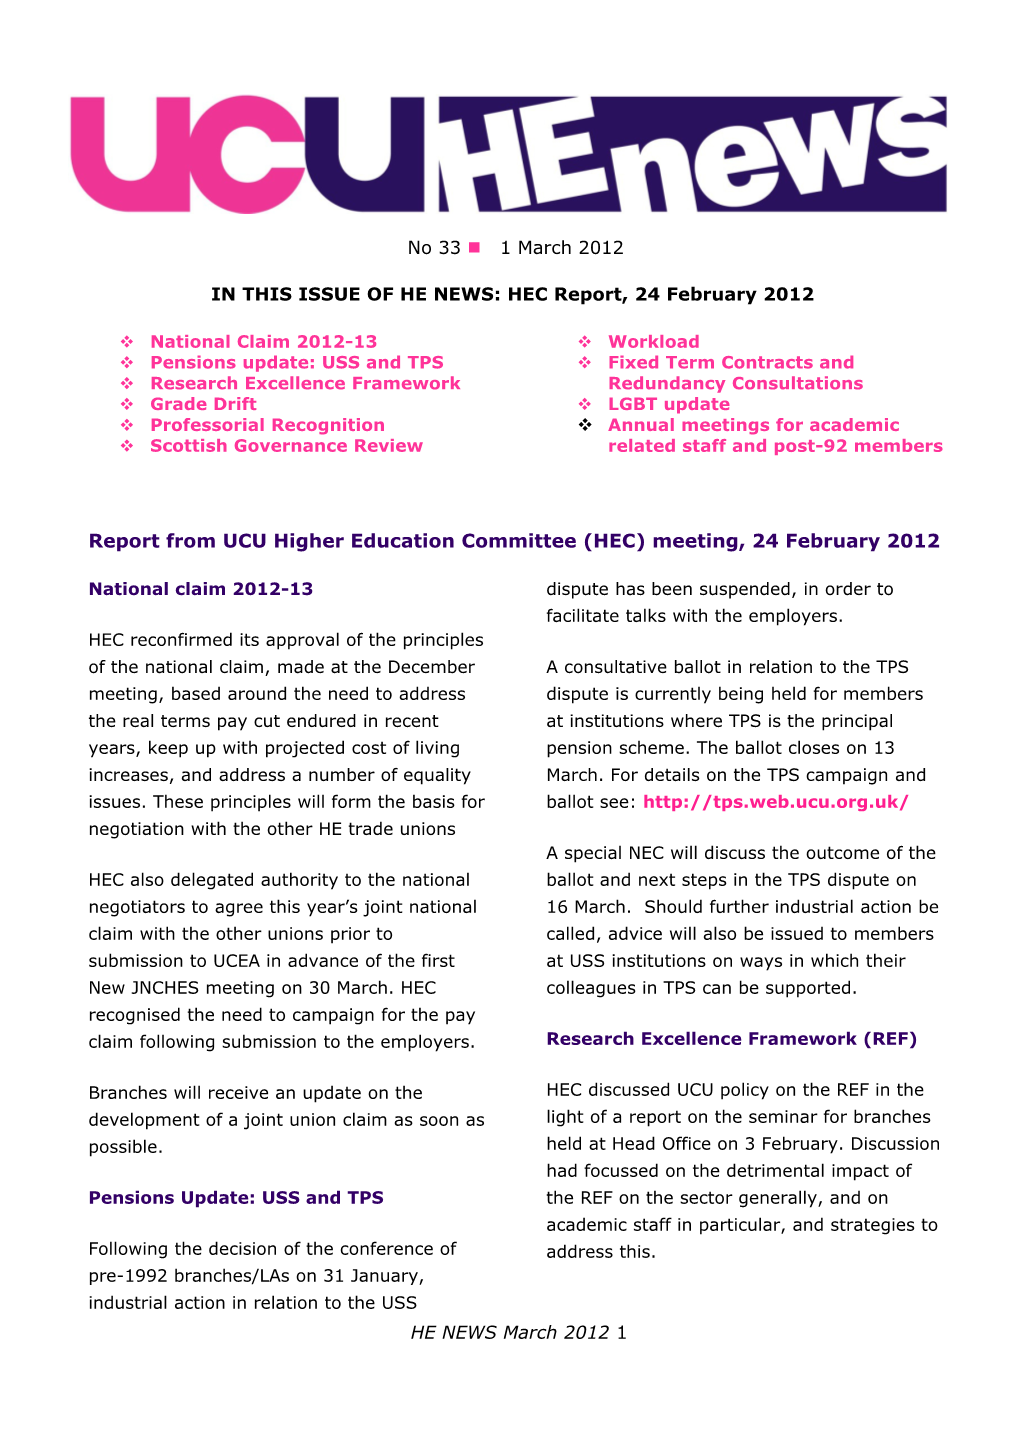 IN THIS ISSUE of HE NEWS: HEC Report, 24 February 2012